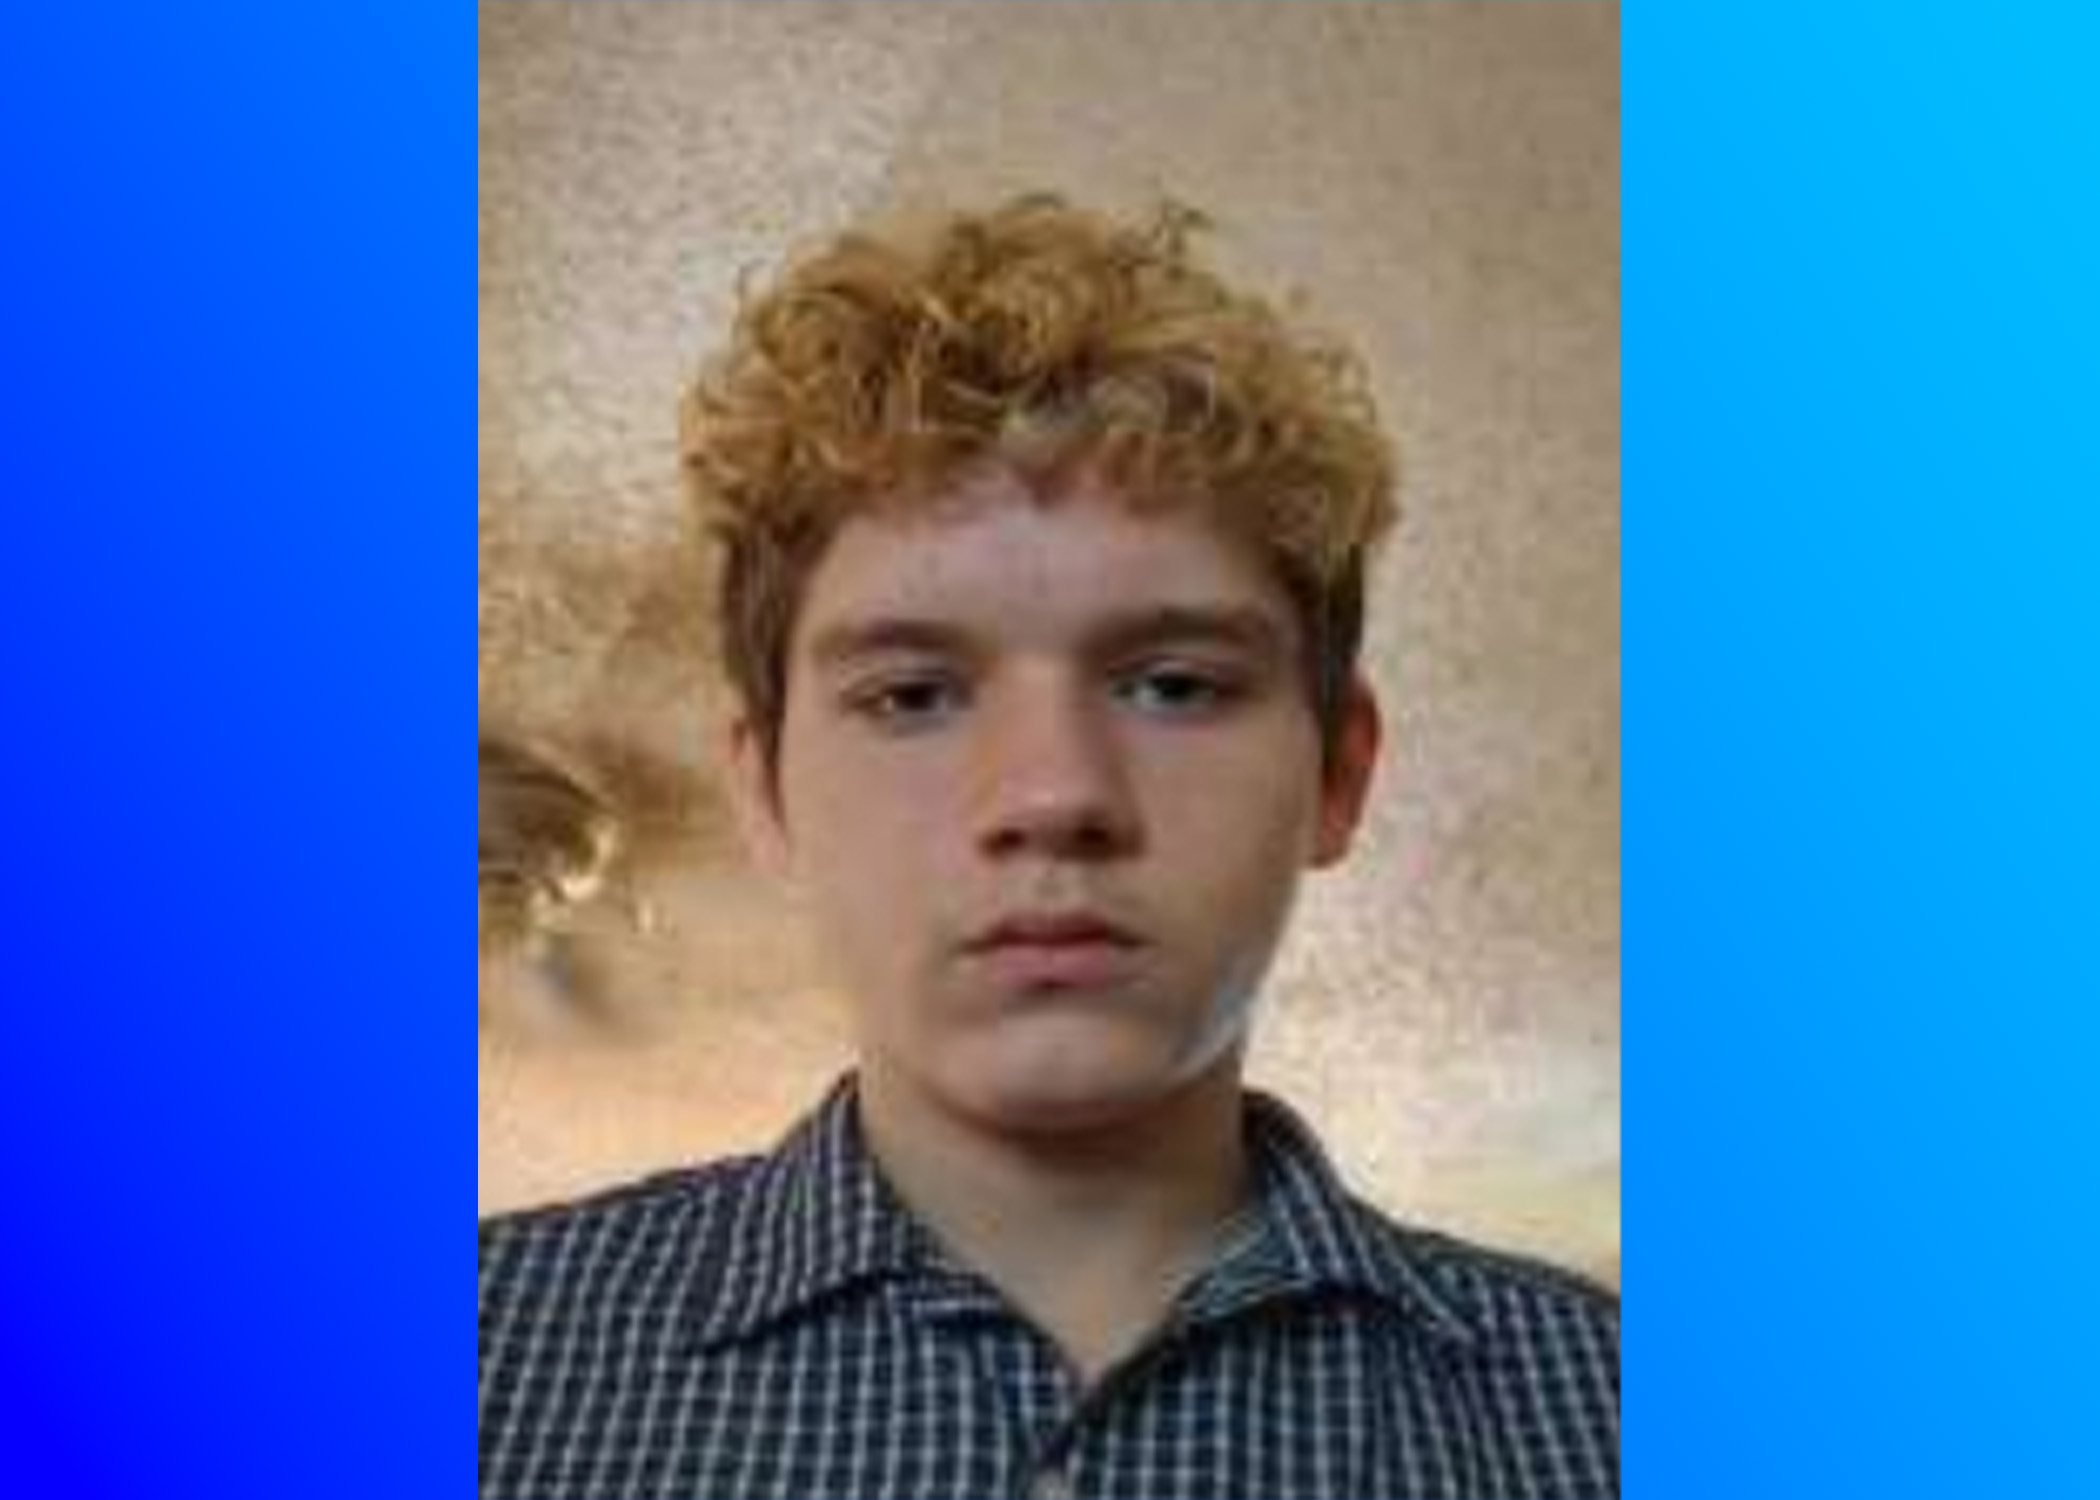 CANCELED: Emergency Missing Child Alert issued for 15-year-old